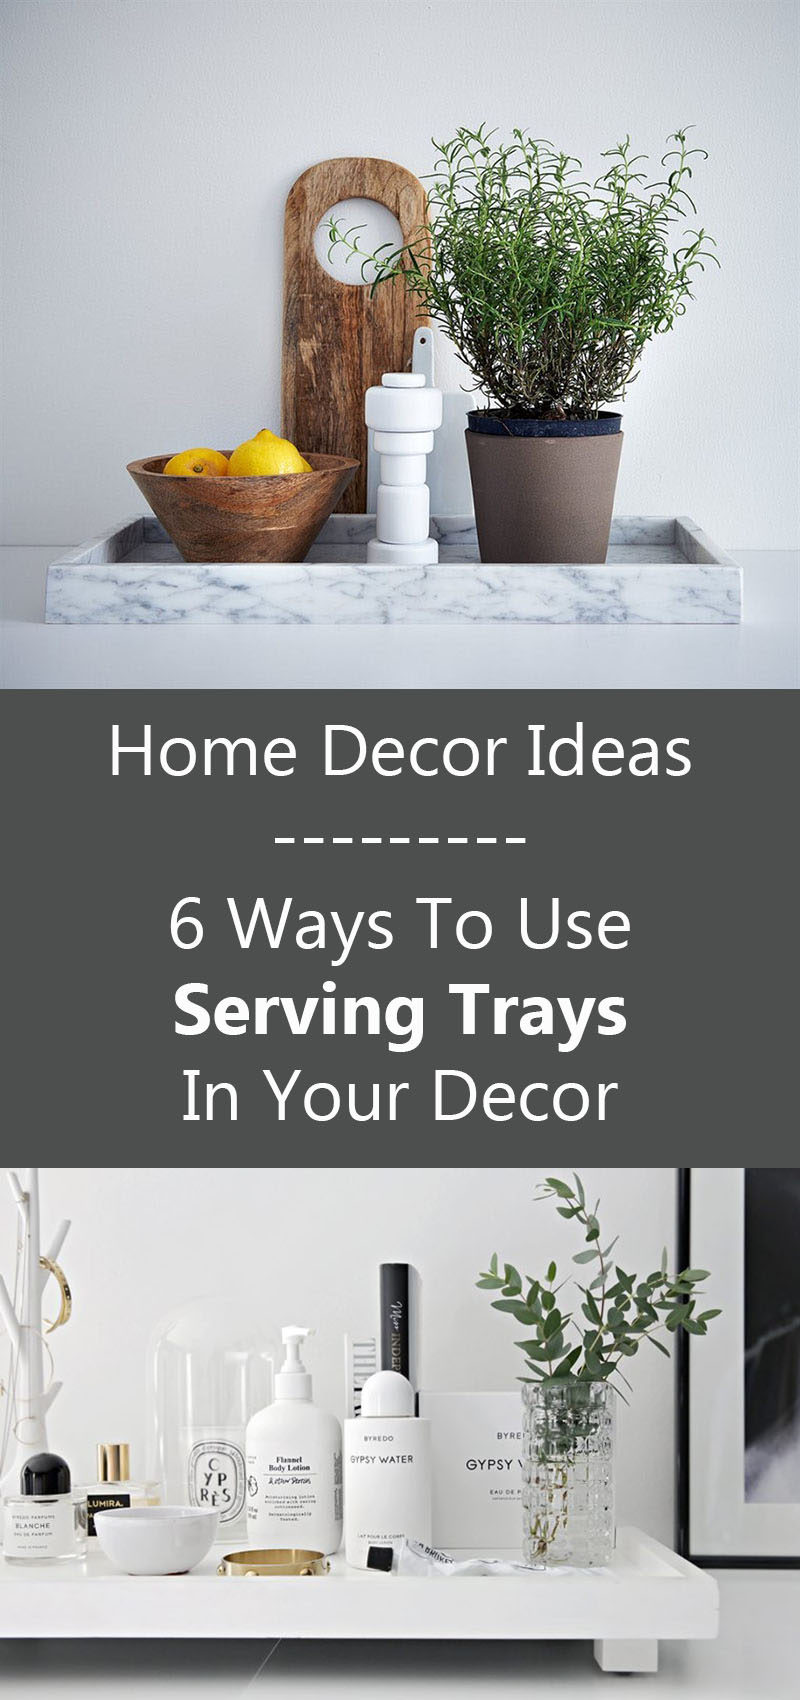 Home Decor Ideas - 6 Ways To Use Serving Trays In Your Decor